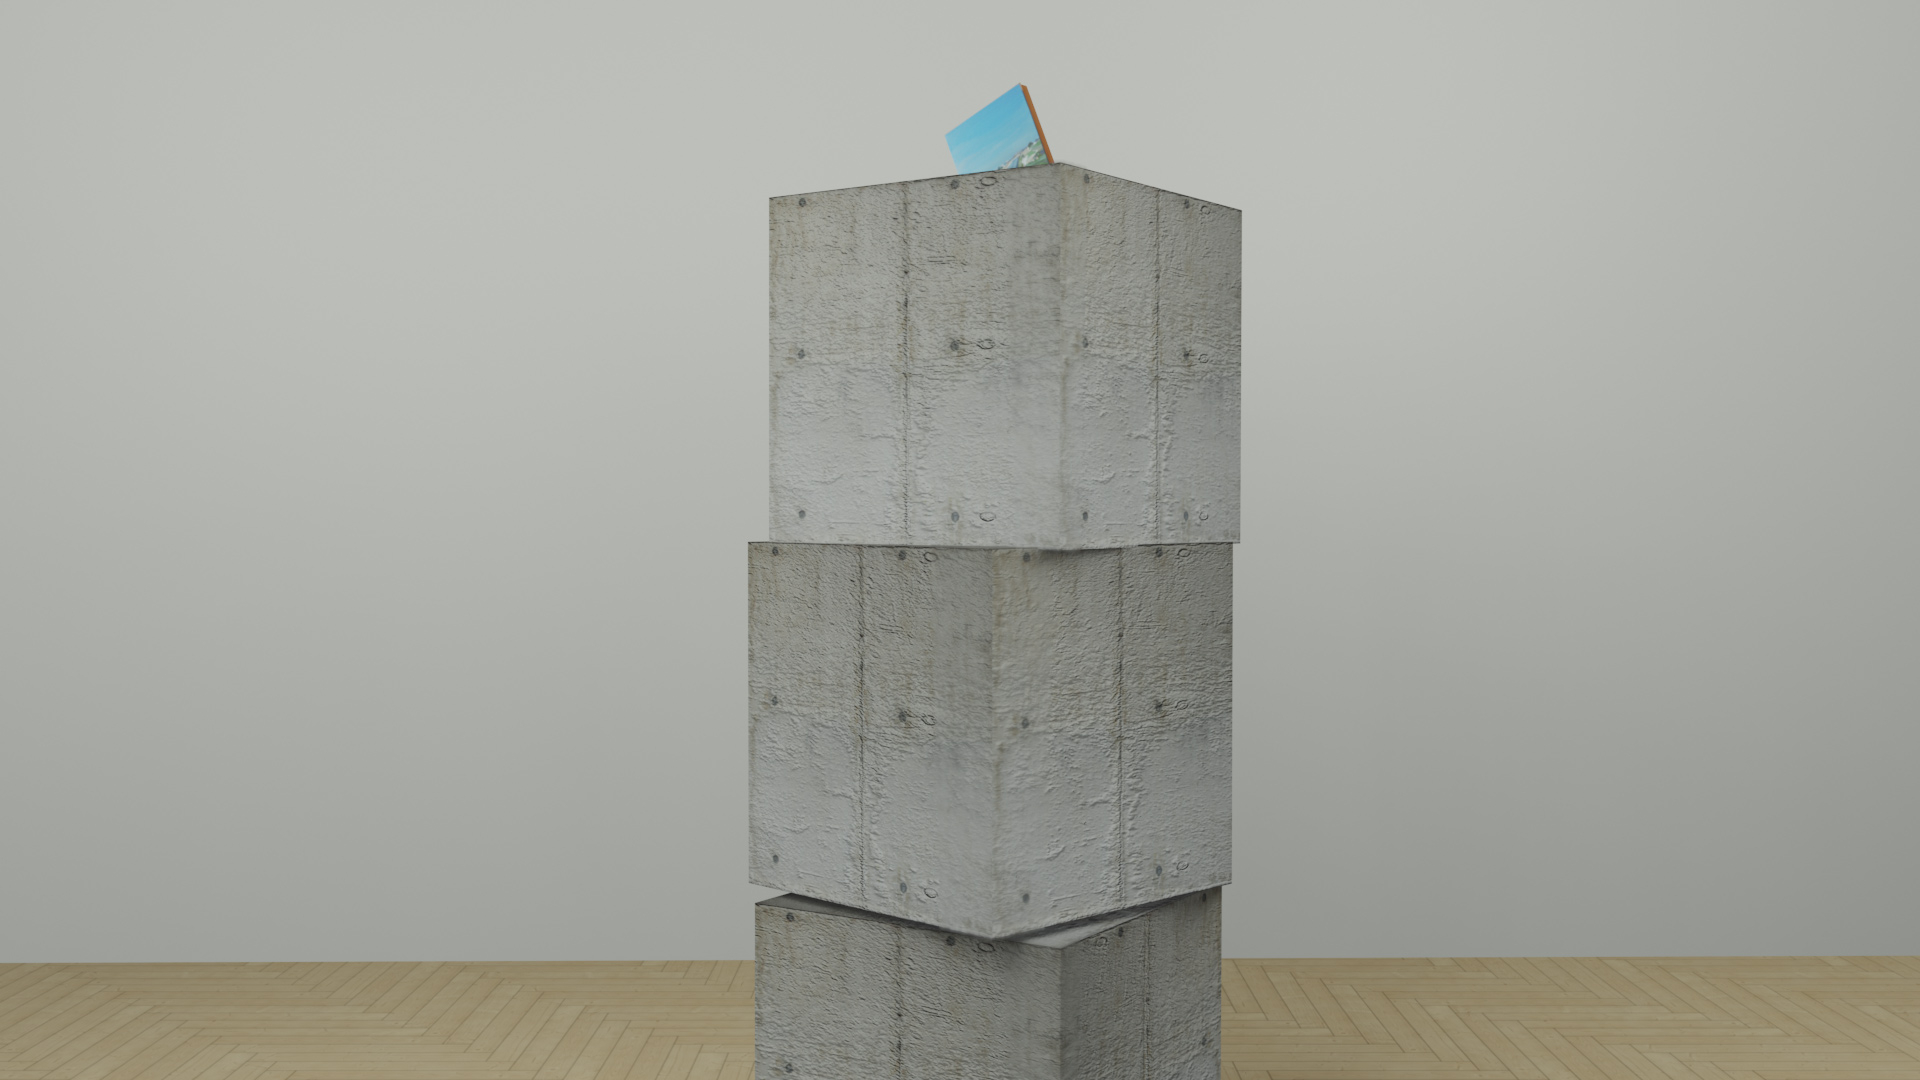 Image of three concrete blocks with a painting on top